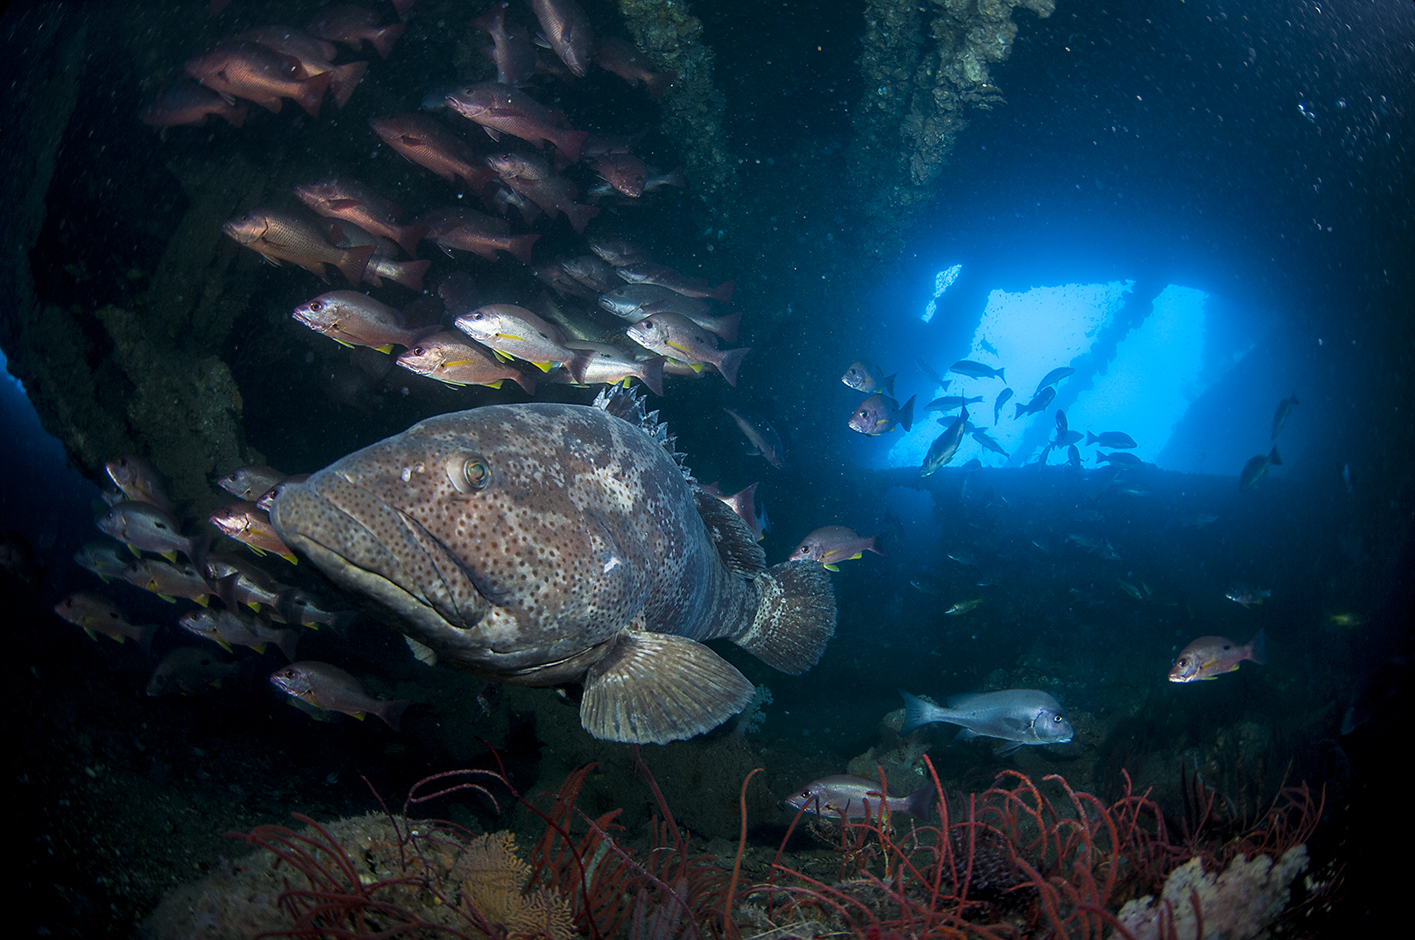 Diving the Yongala shipwreck abundant with marine creatures of all shapes and sizes